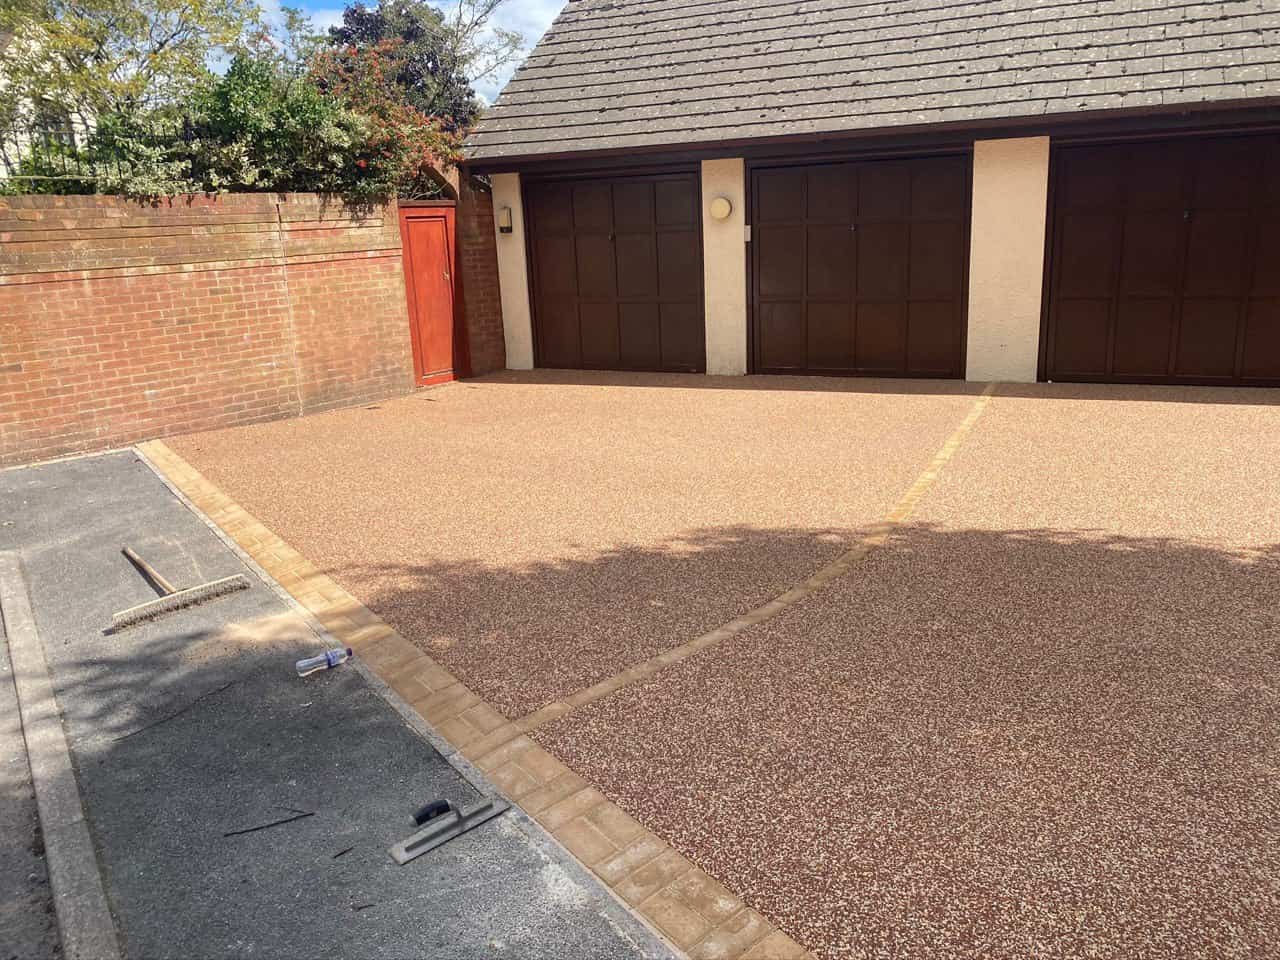 This is a photo of a resin driveway installed in Epping Forest by Epping Forest Resin Driveways